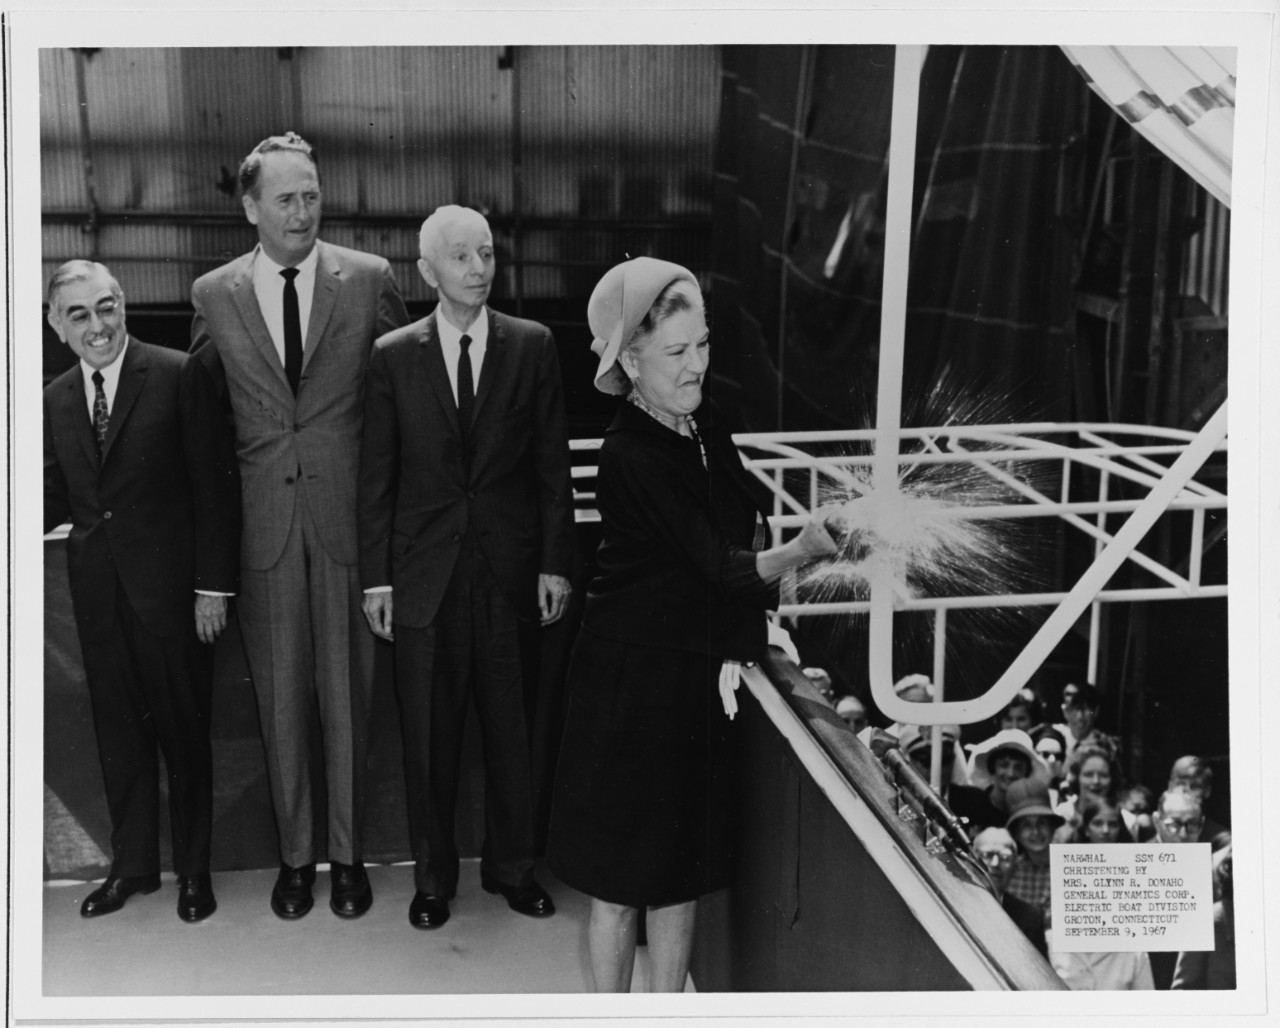 Sponsor Mrs. Glynn R. Donaho christens the USS NARWHAL (SS(N)-671) at Groton, Connecticut.